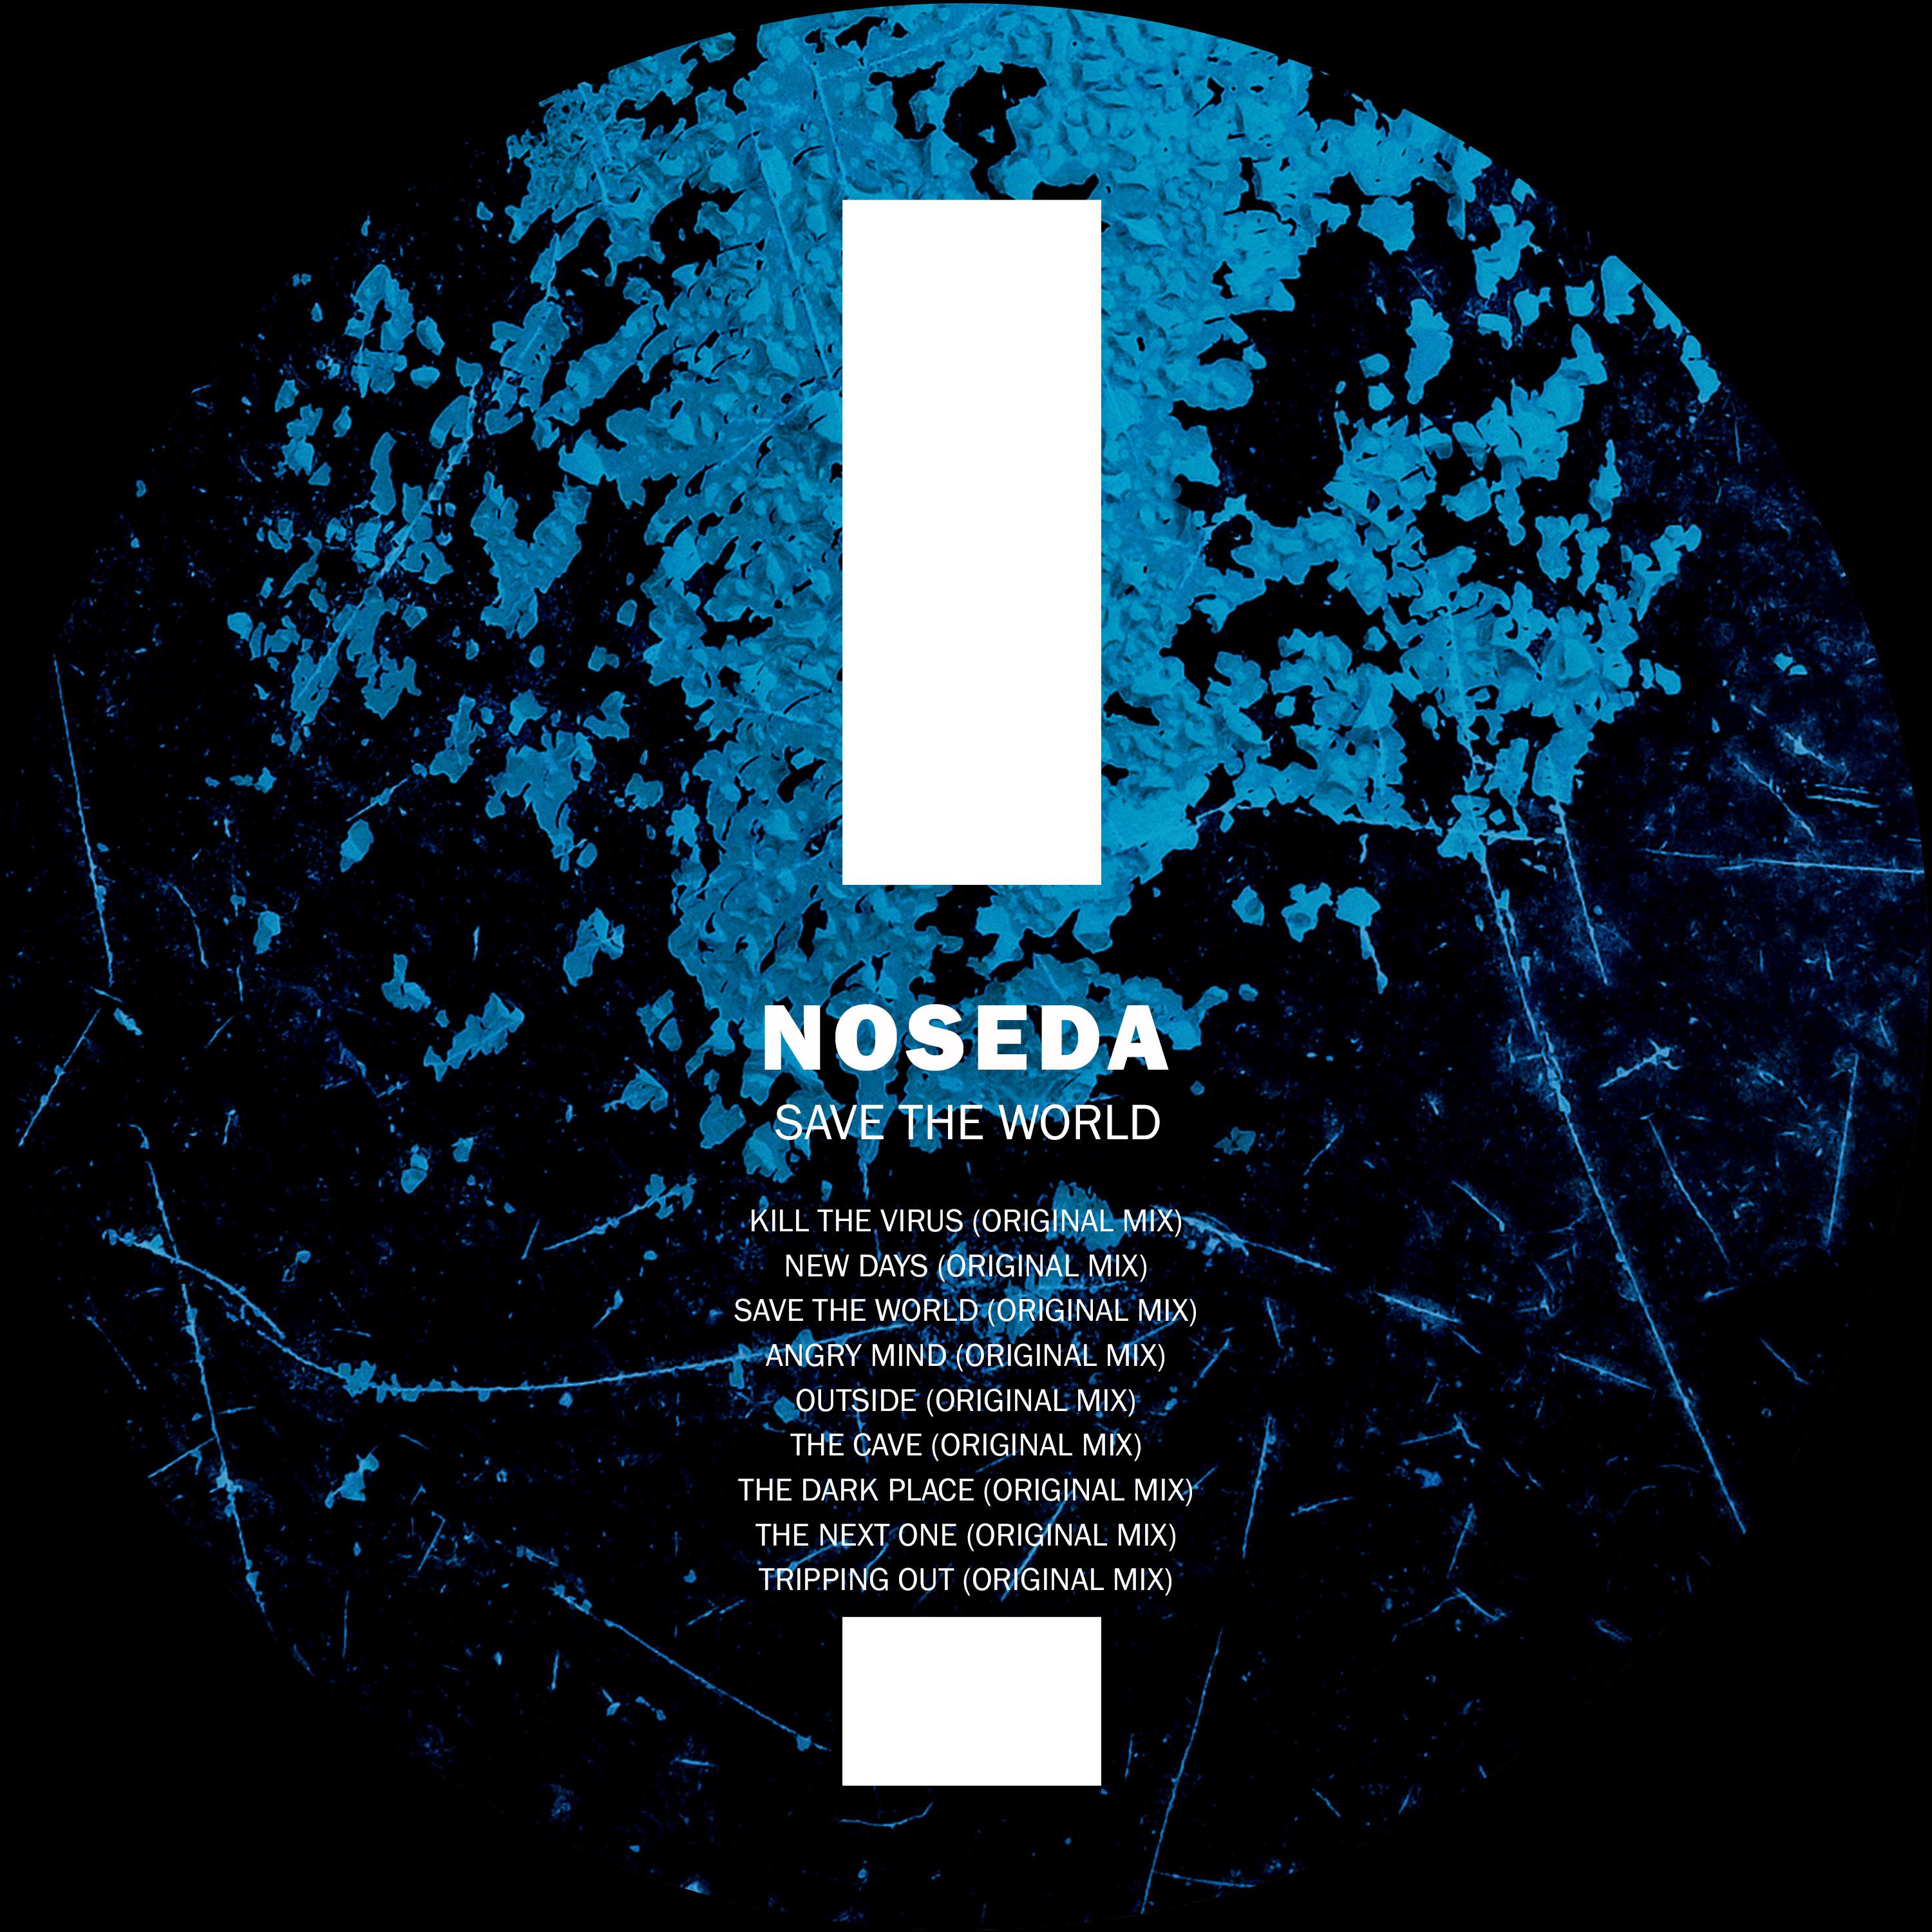 Noseda - The Next One